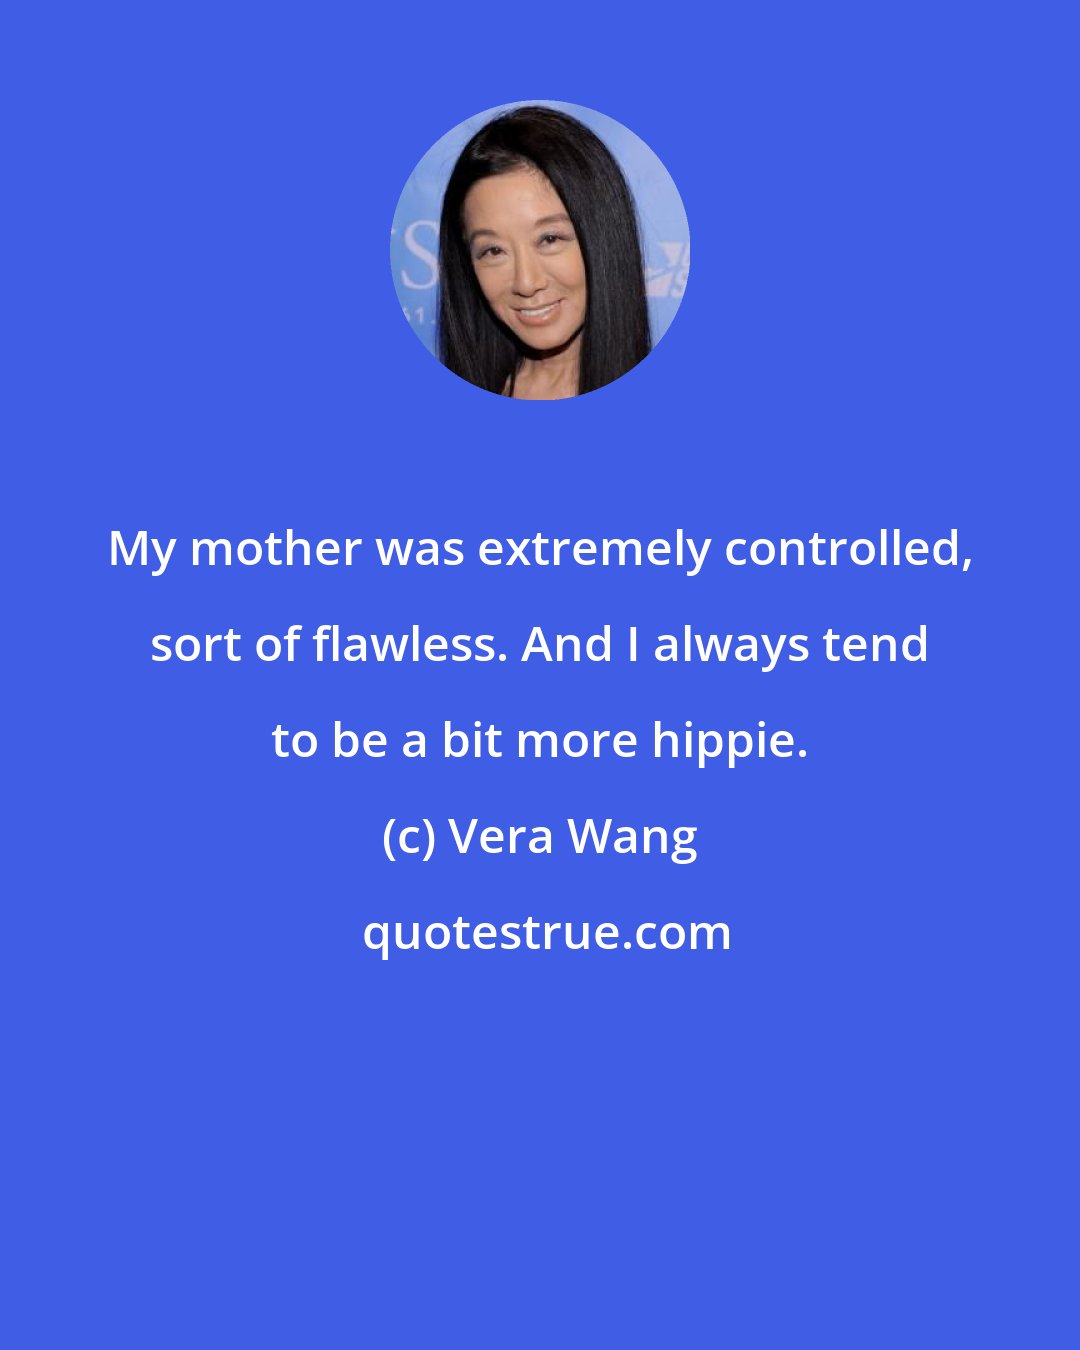 Vera Wang: My mother was extremely controlled, sort of flawless. And I always tend to be a bit more hippie.